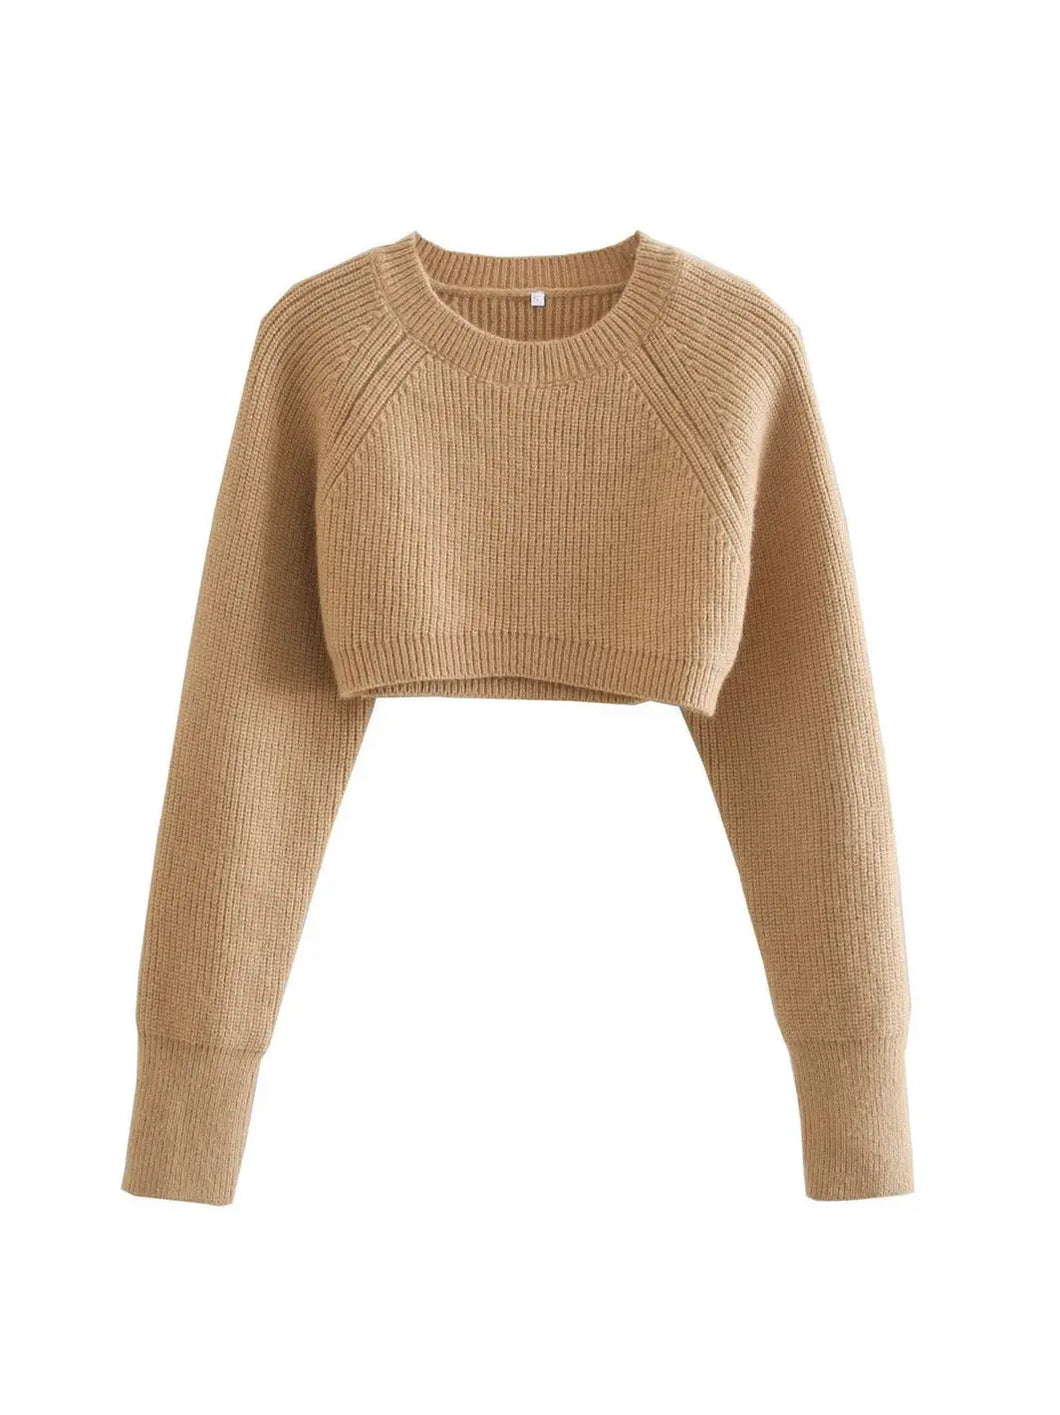 Sexy Cropped Solid Crew Neck Pullover Sweater adawholesale